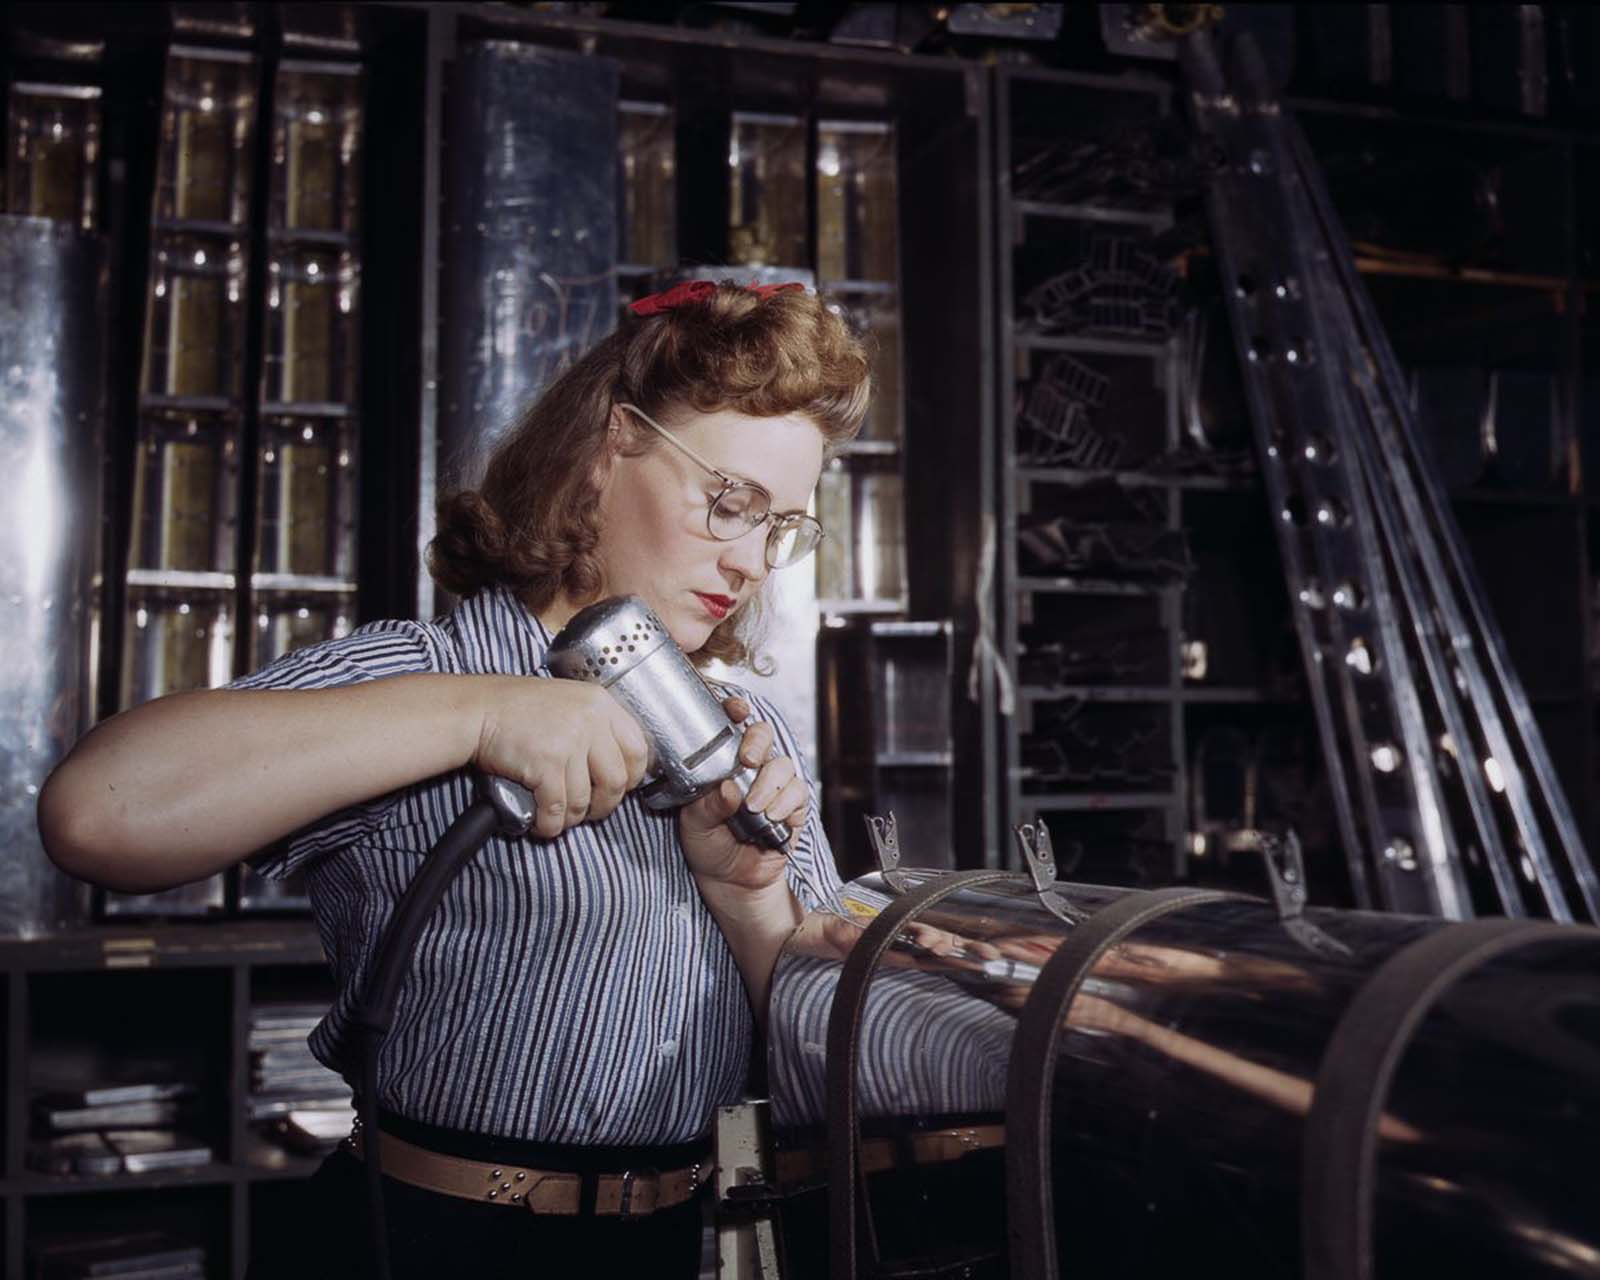 A North American Aviation employee assembles a section of the leading edge for the horizontal stabilizer of a plane at the plant in Inglewood, California, 1942.